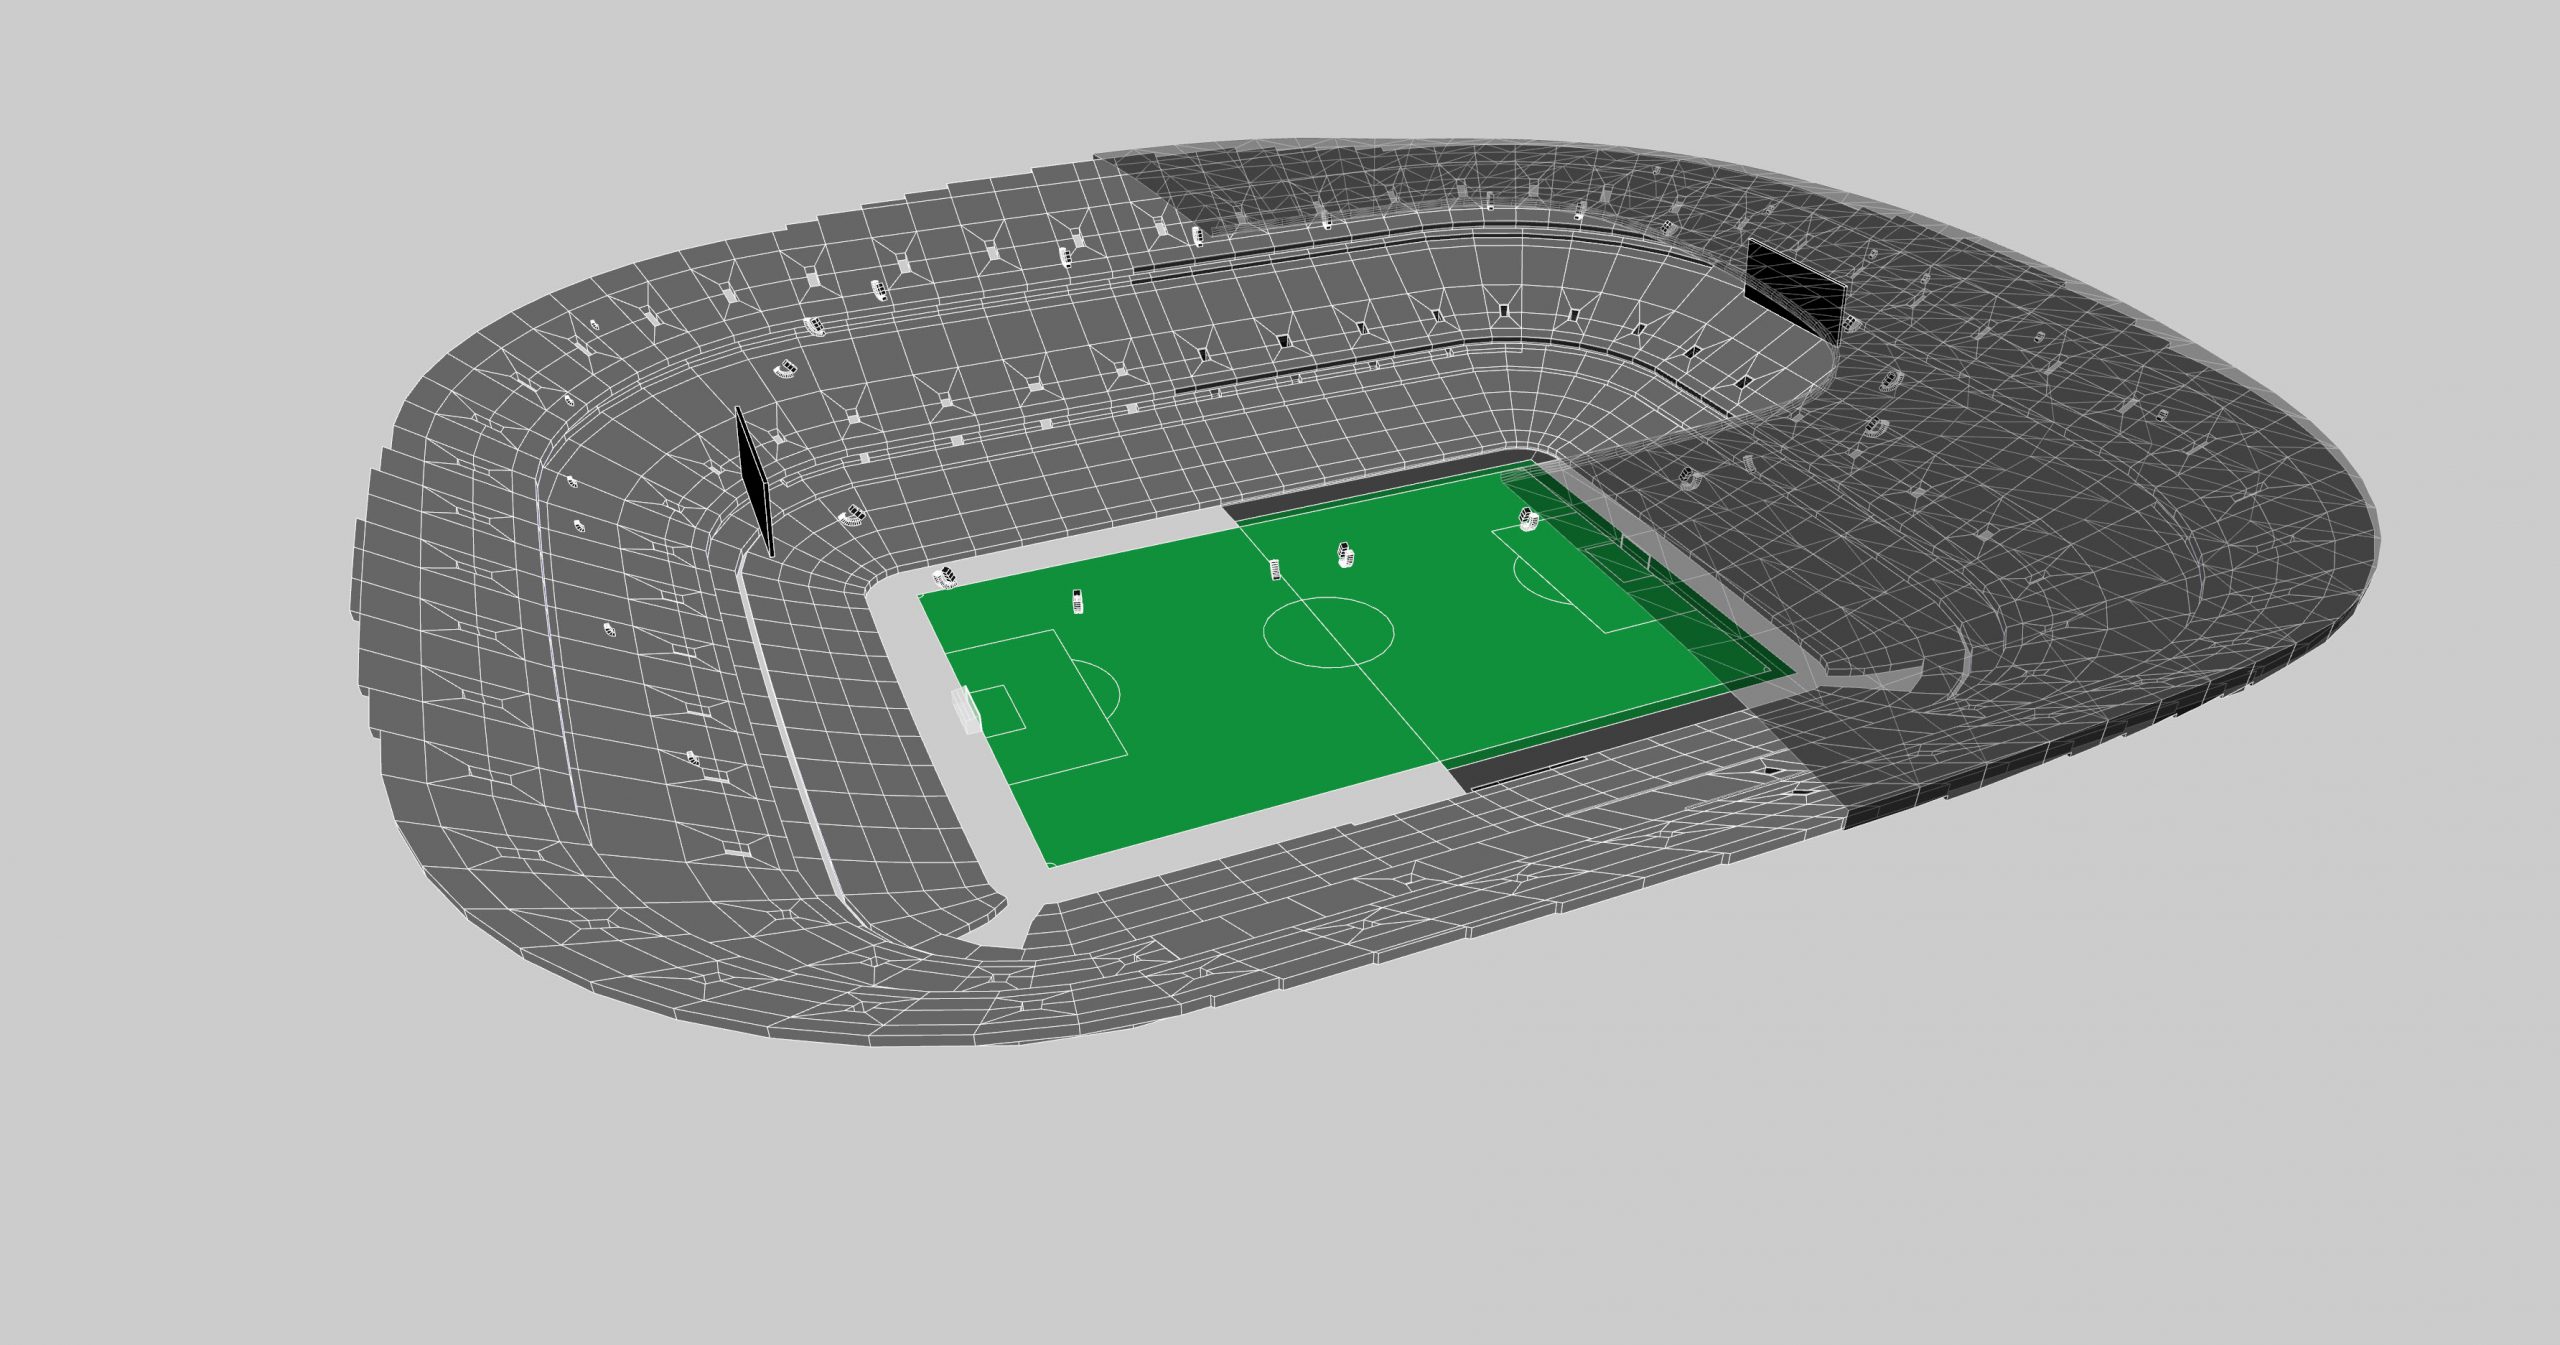 3D Model of sound system set up by L-Acoustics at the Allianz Arena Football Stadium